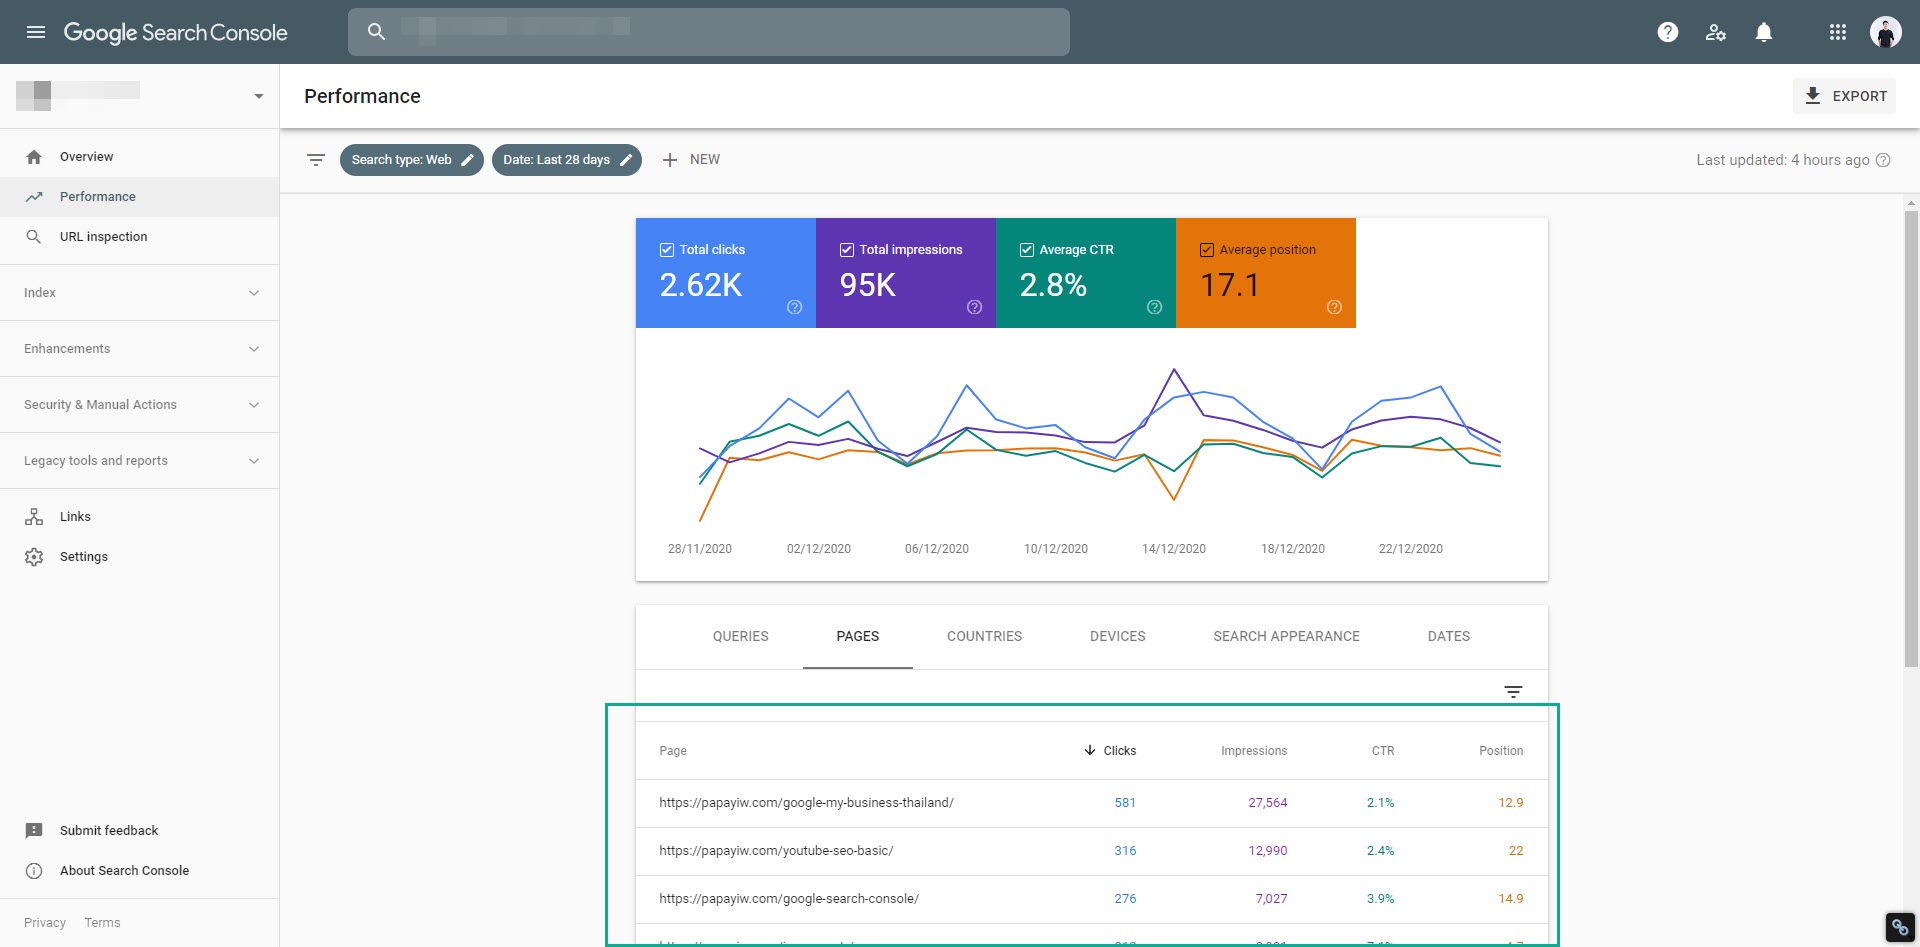 Search Console Overview Metrics